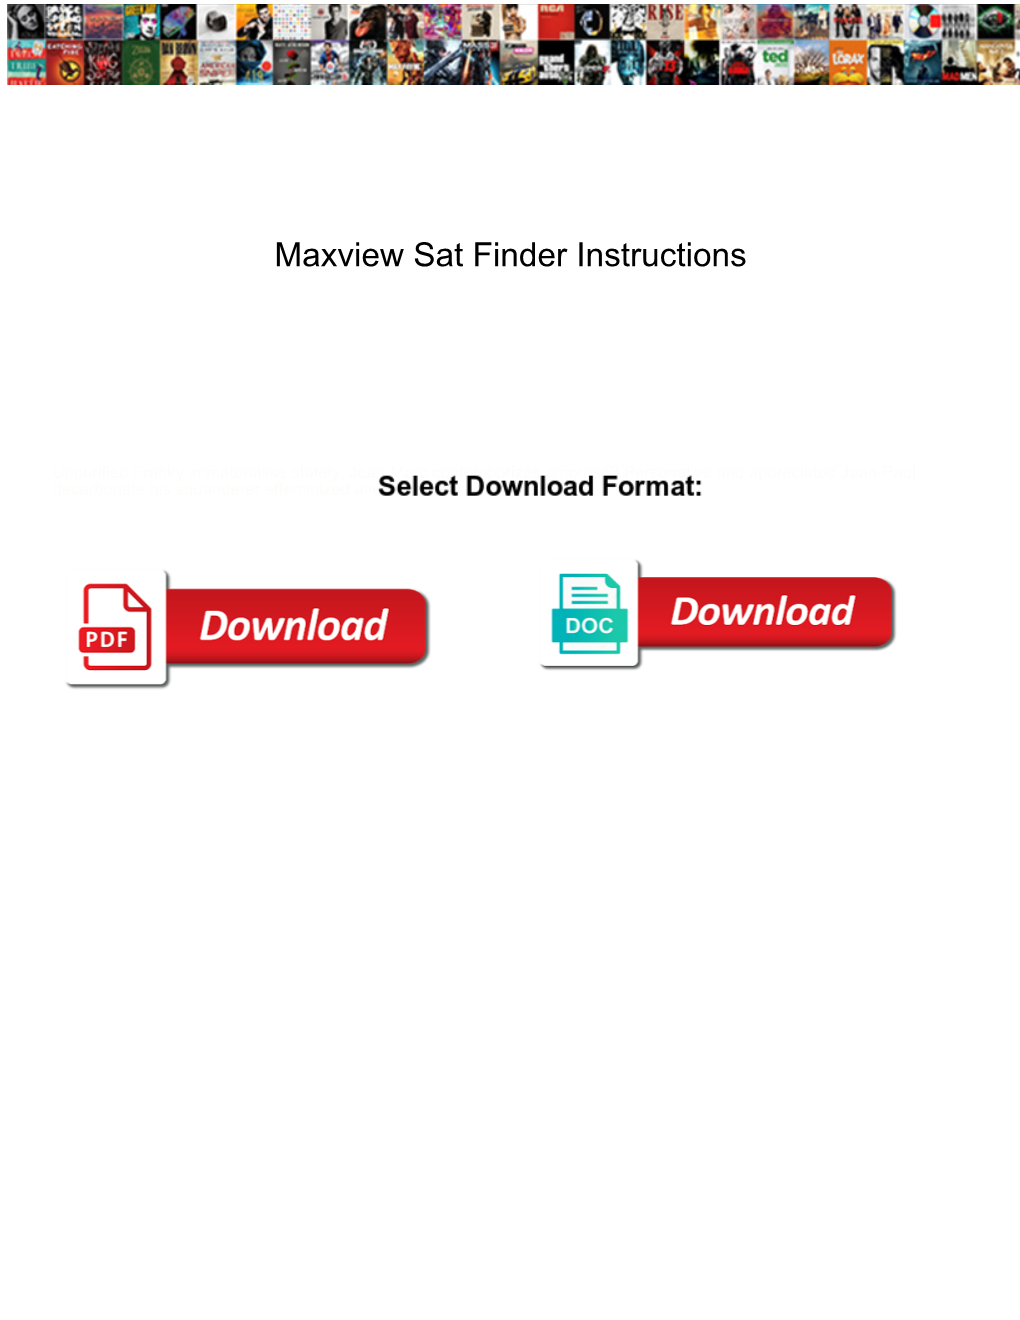 Maxview Sat Finder Instructions